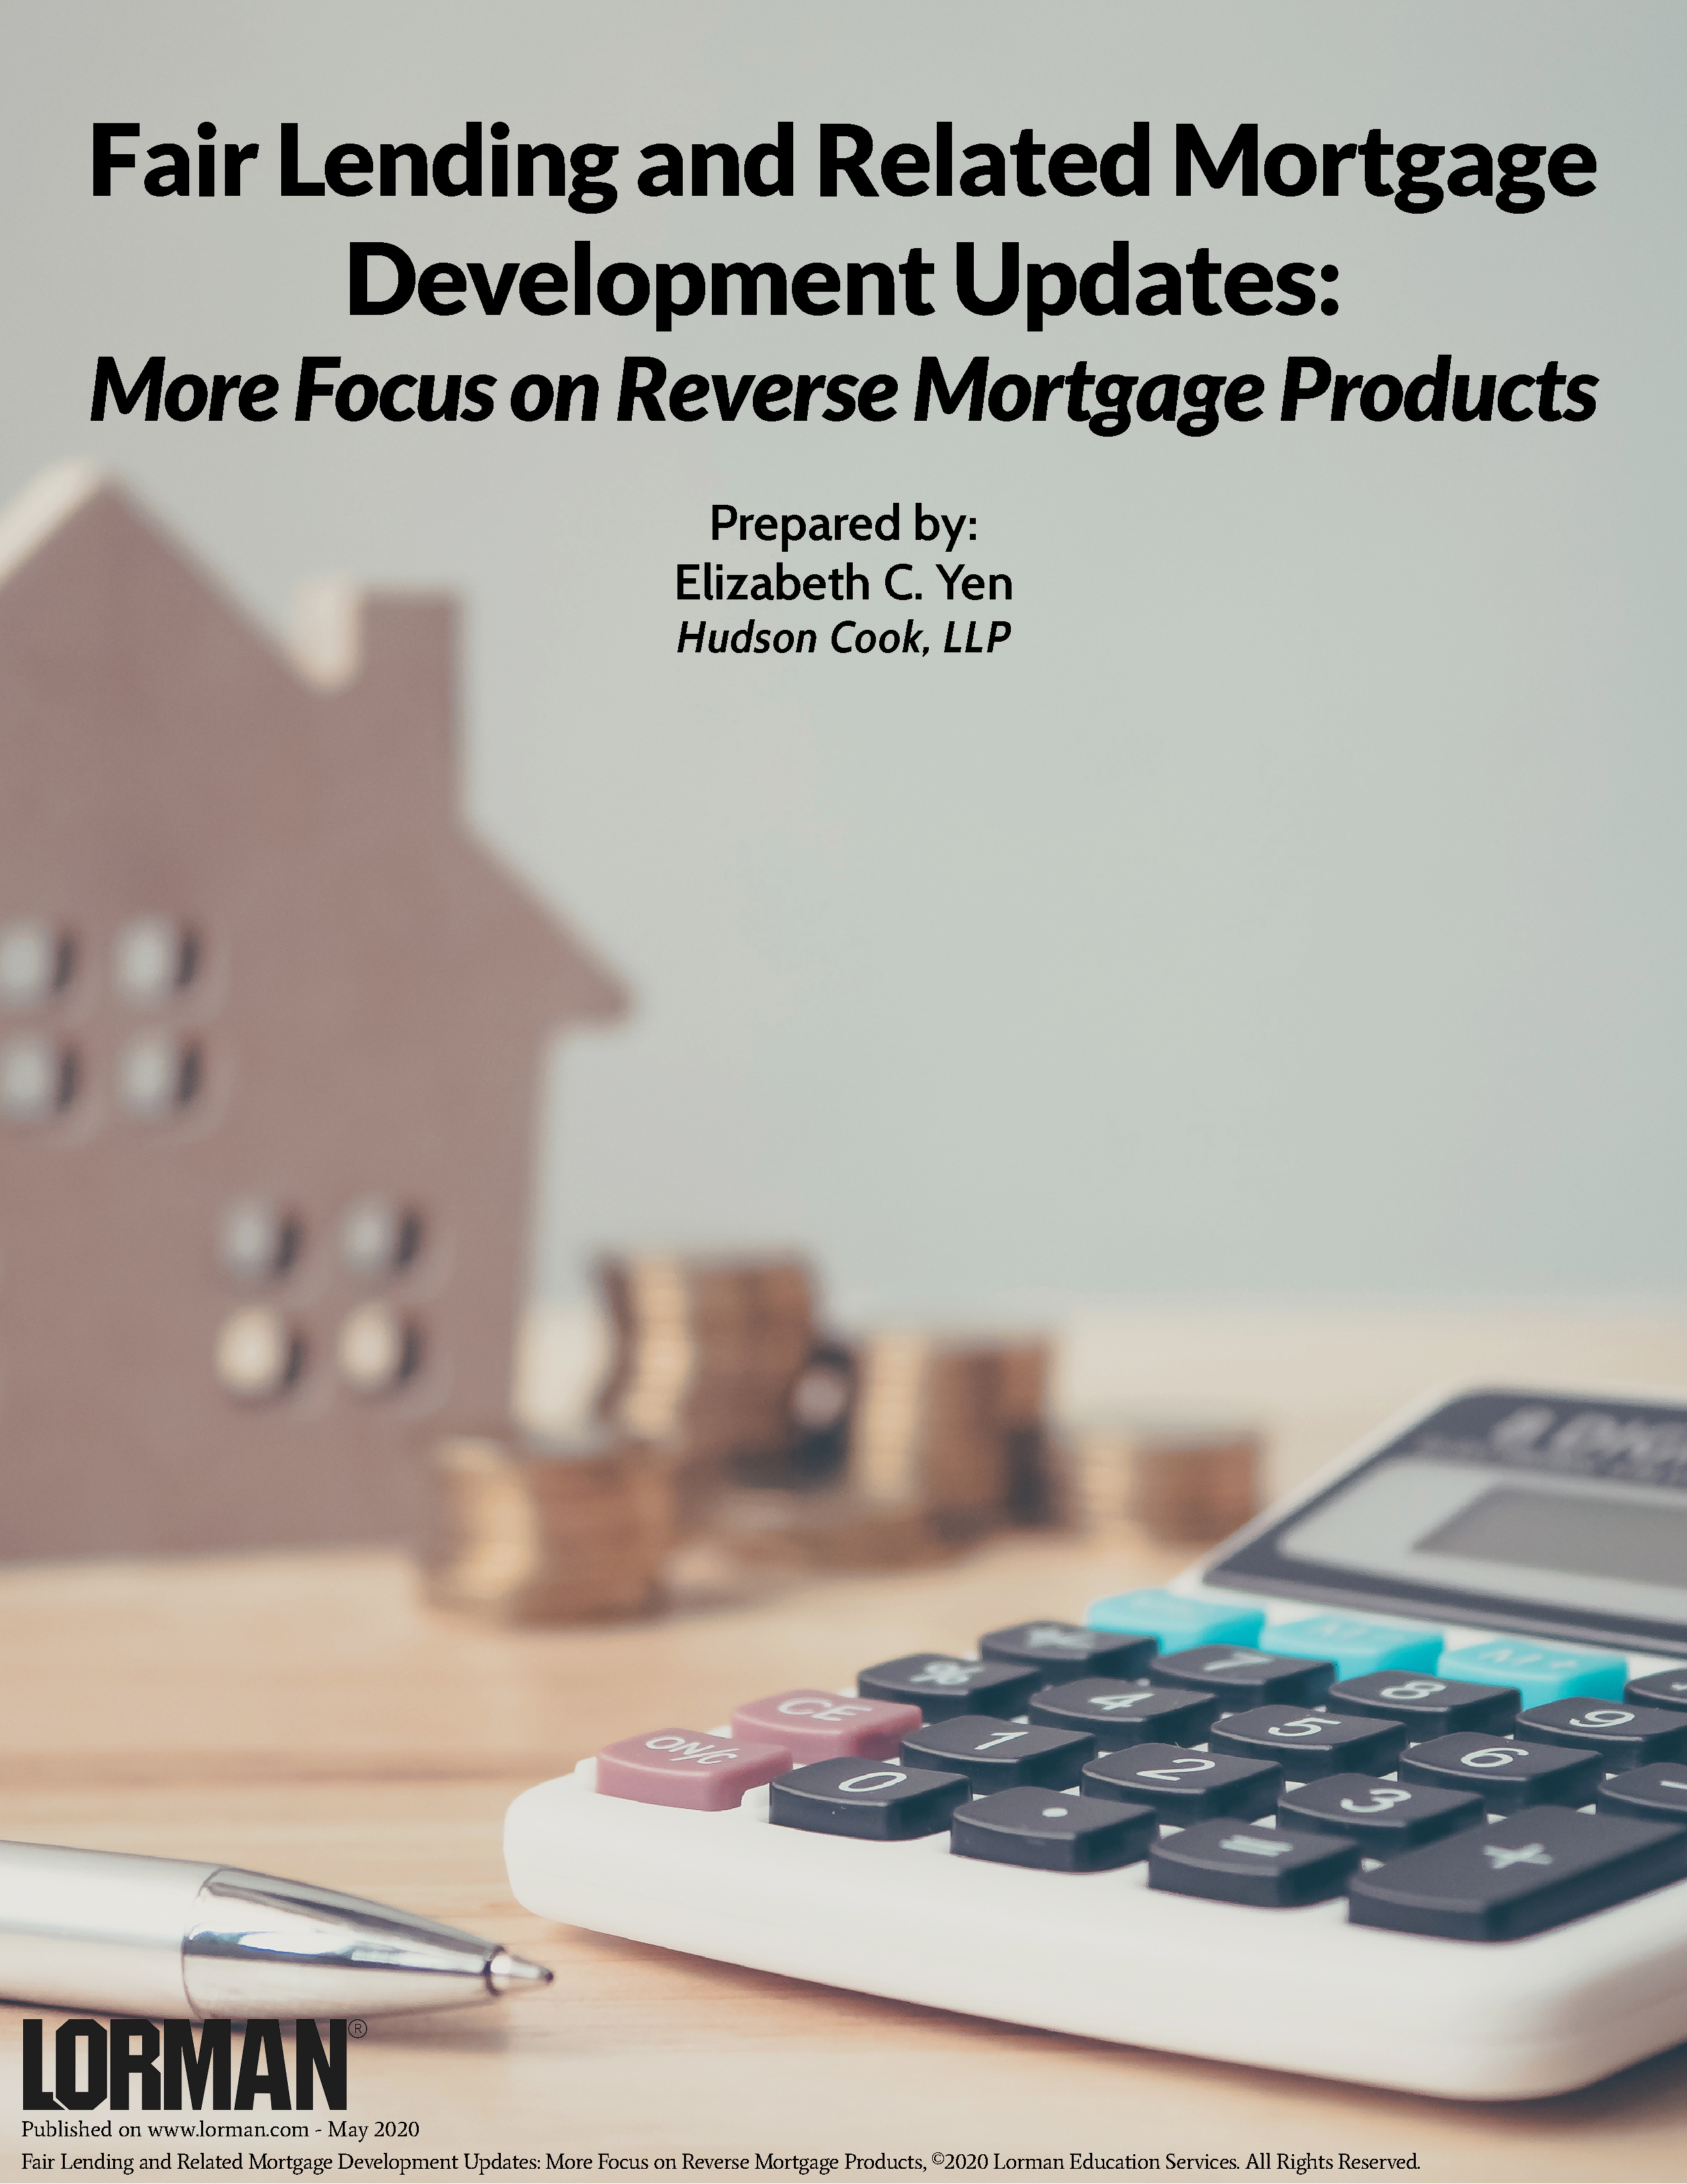 Fair Lending and Related Mortgage Development Updates: More Focus on Reverse Mortgage Products